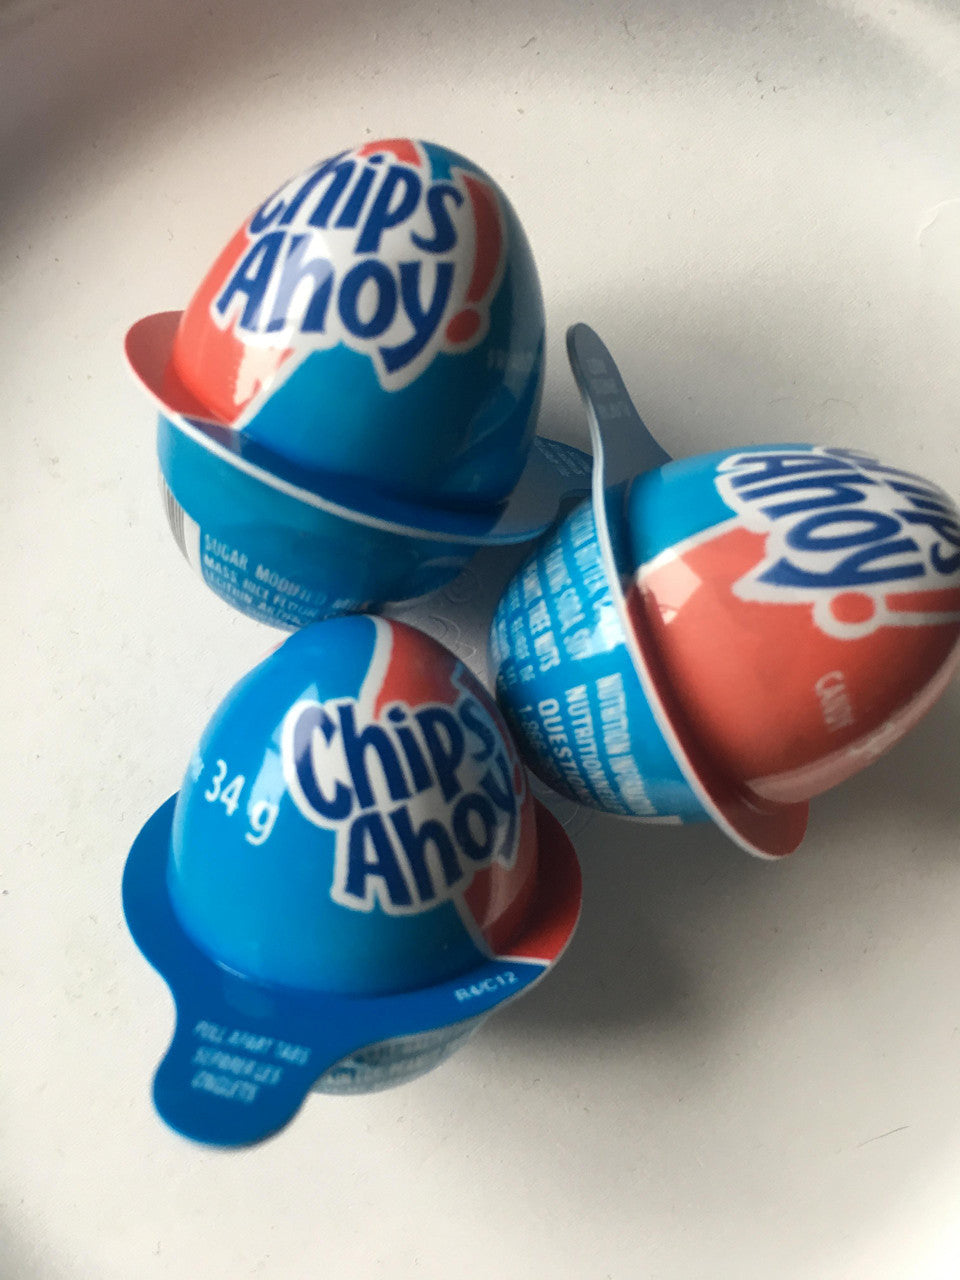 Chips Ahoy Chocolate Eggs Set of 3 Candy 34 gram each